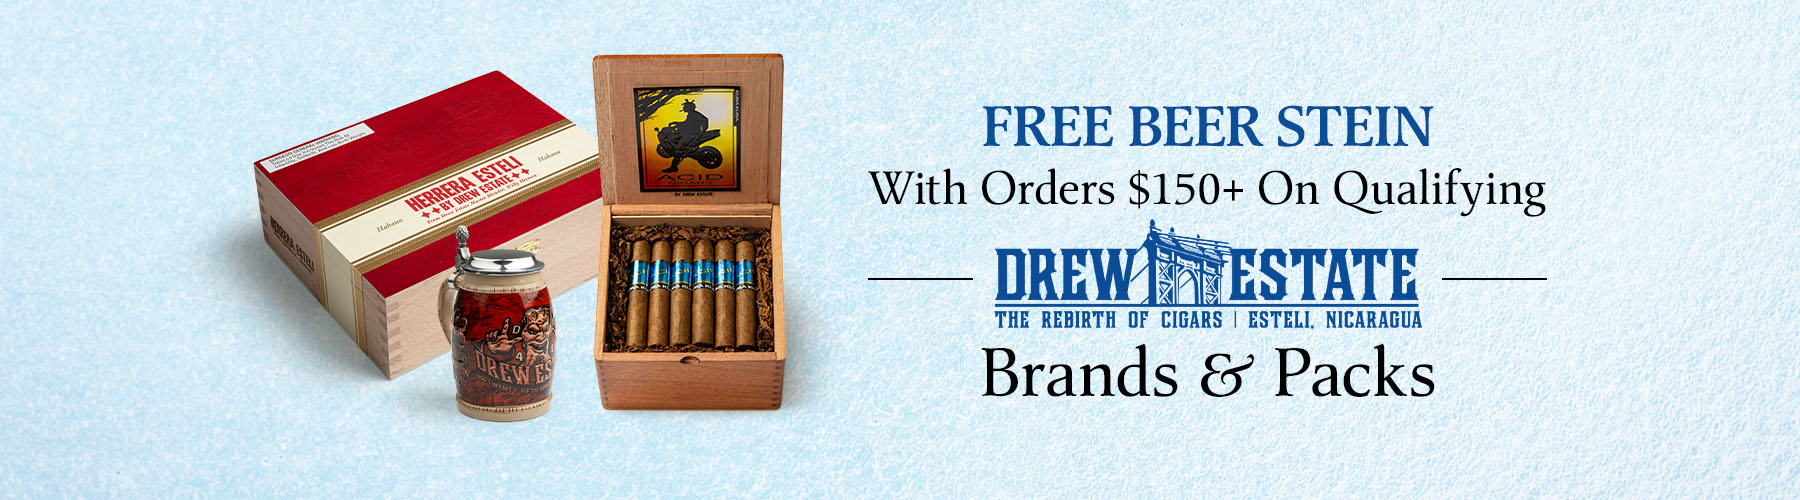 Free Beer Stein with orders $150+ on qualifying Drew Estate brands & packs!